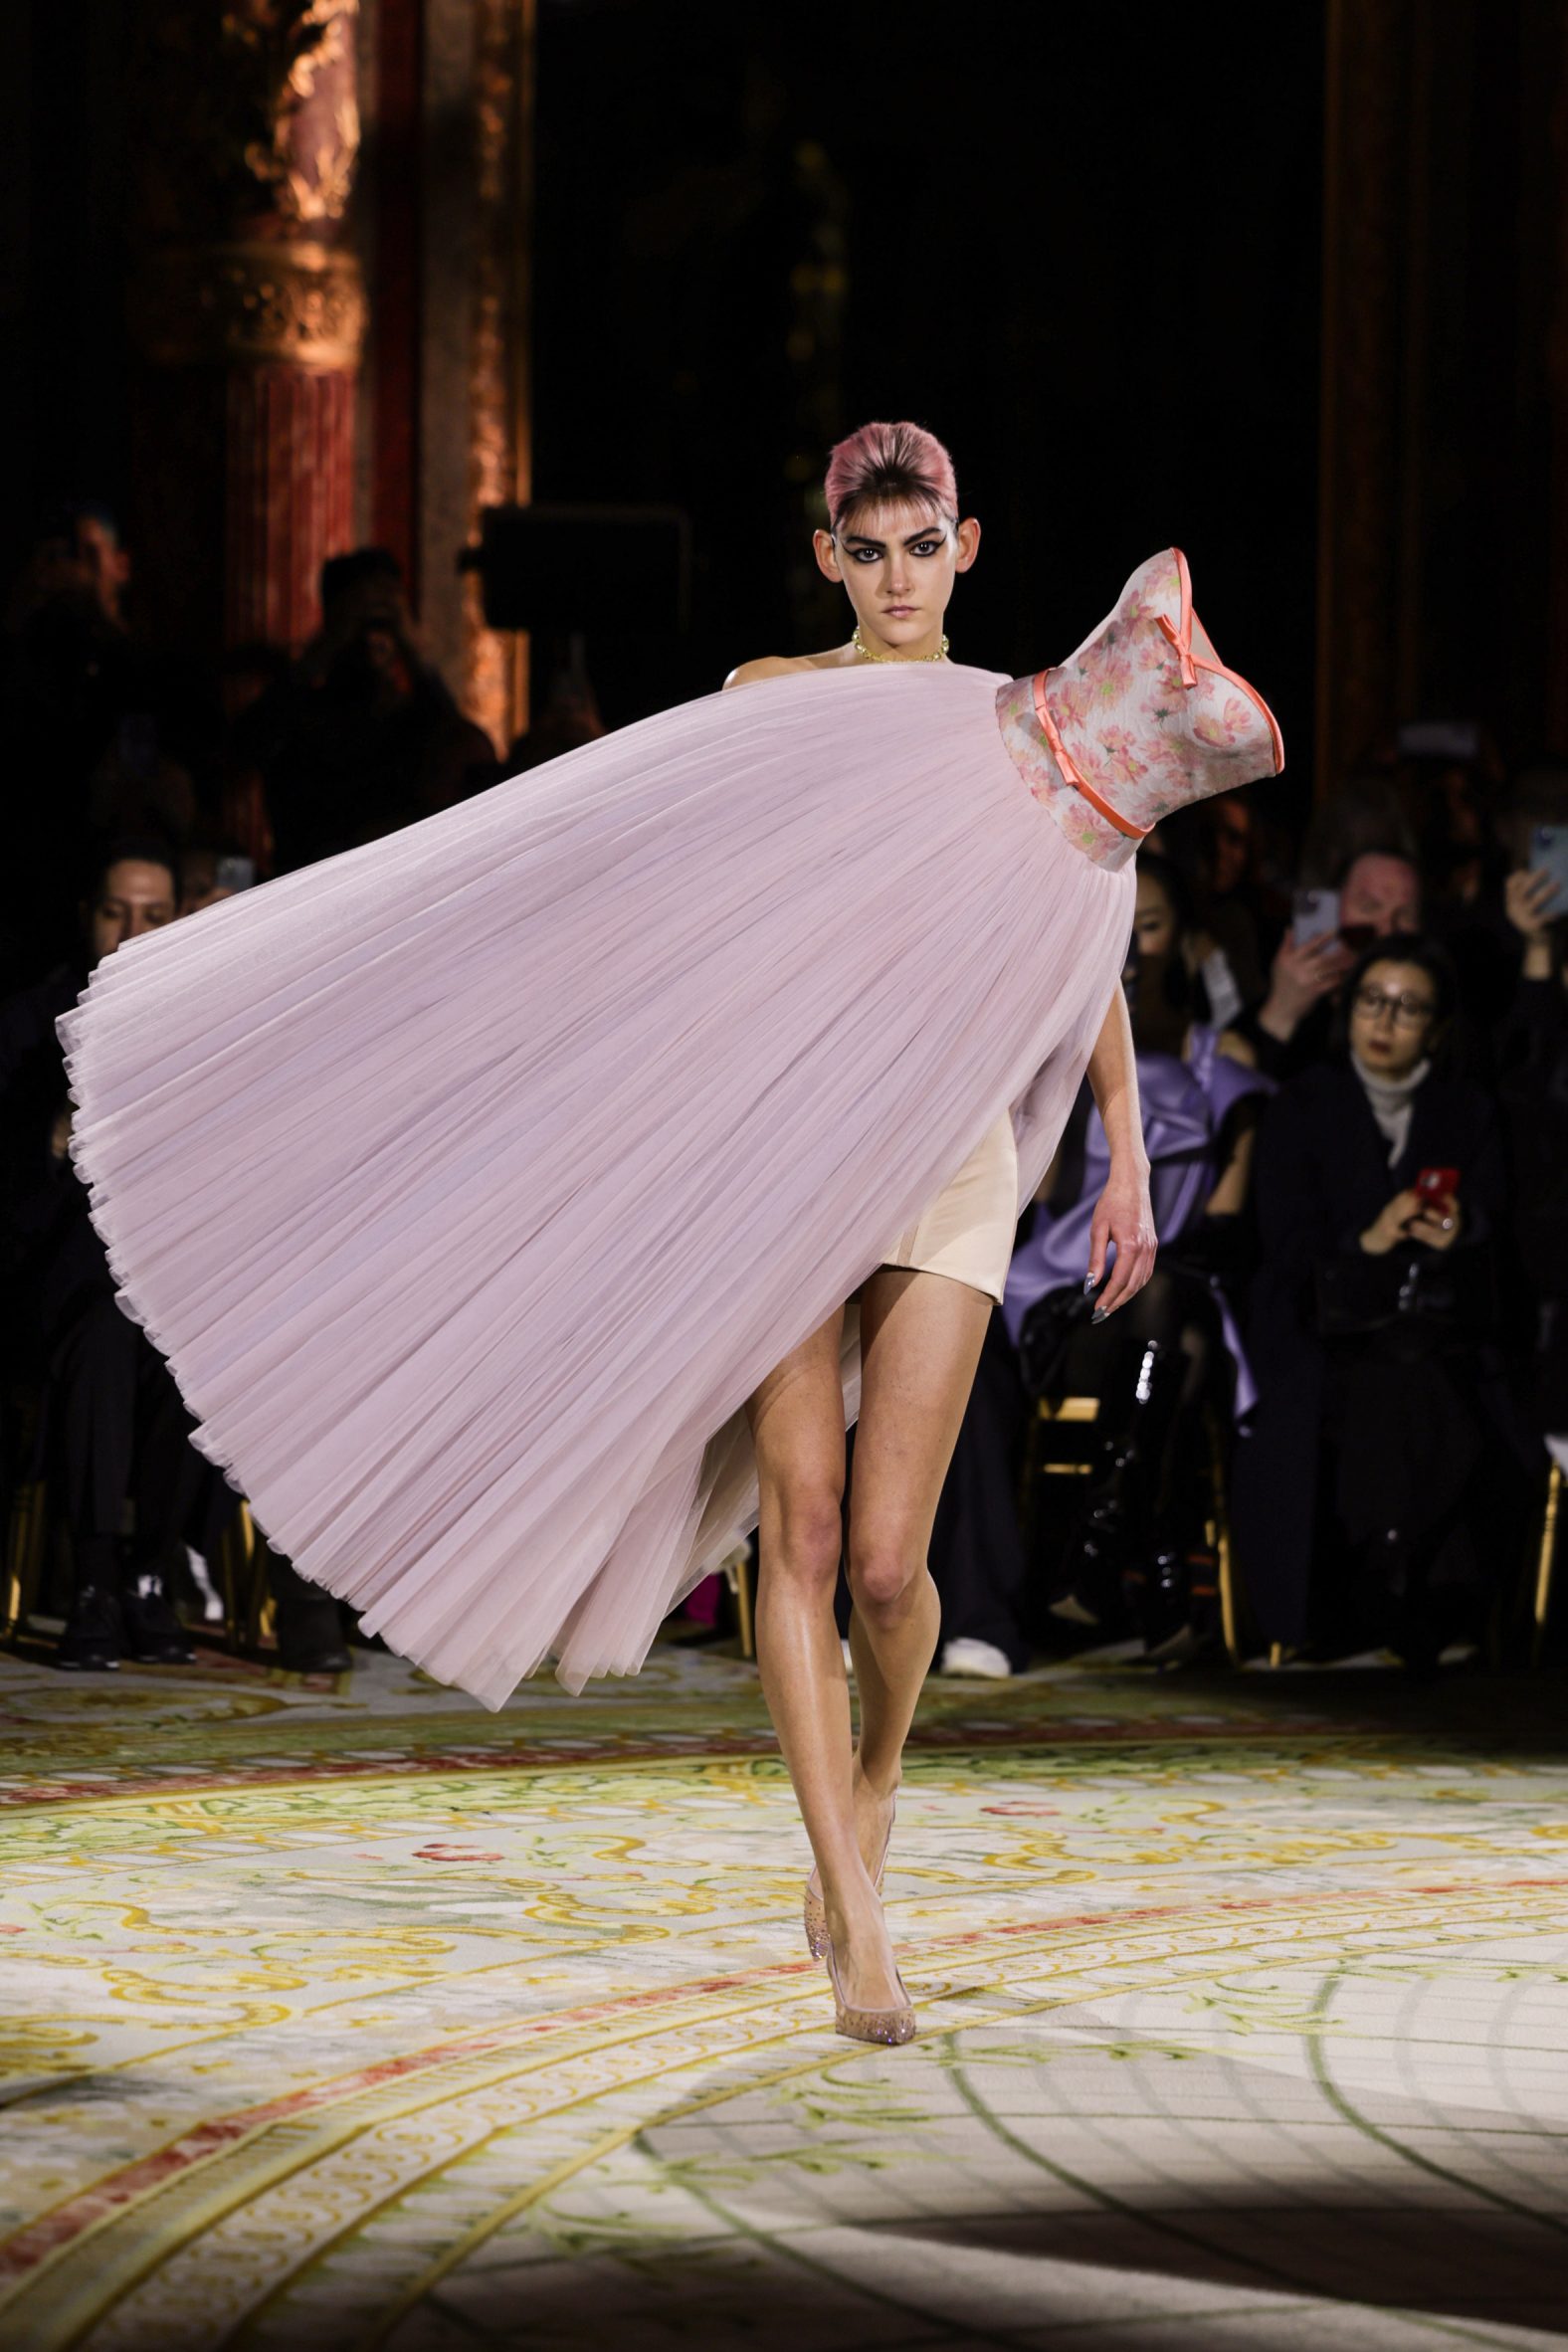 Lilac Viktor & Rolf gown arranged at an angle on model's body